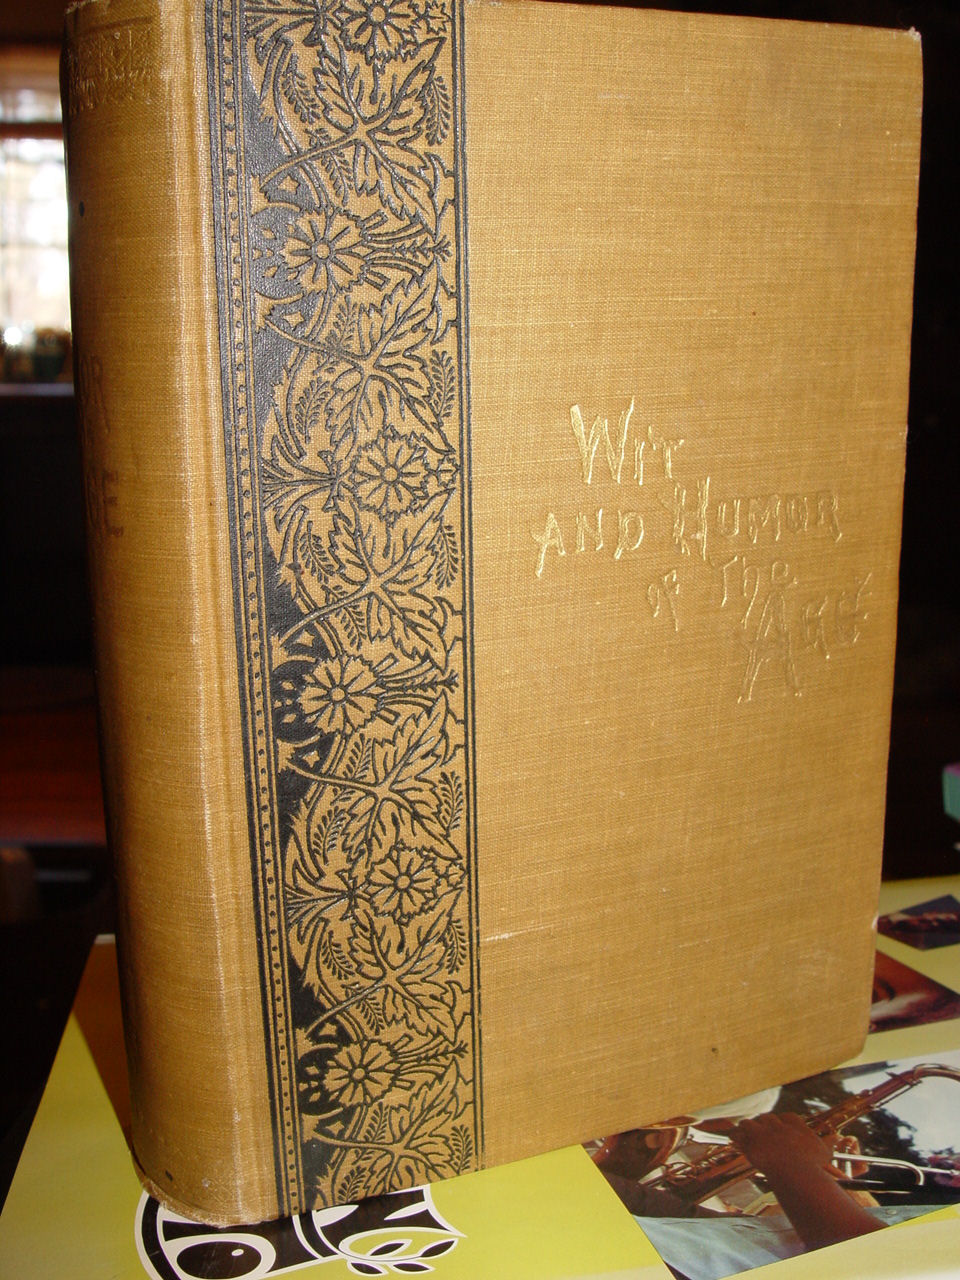 1883 Wit And Humor Of The Age, Mark Twain
                        and Others by Melville D Landon